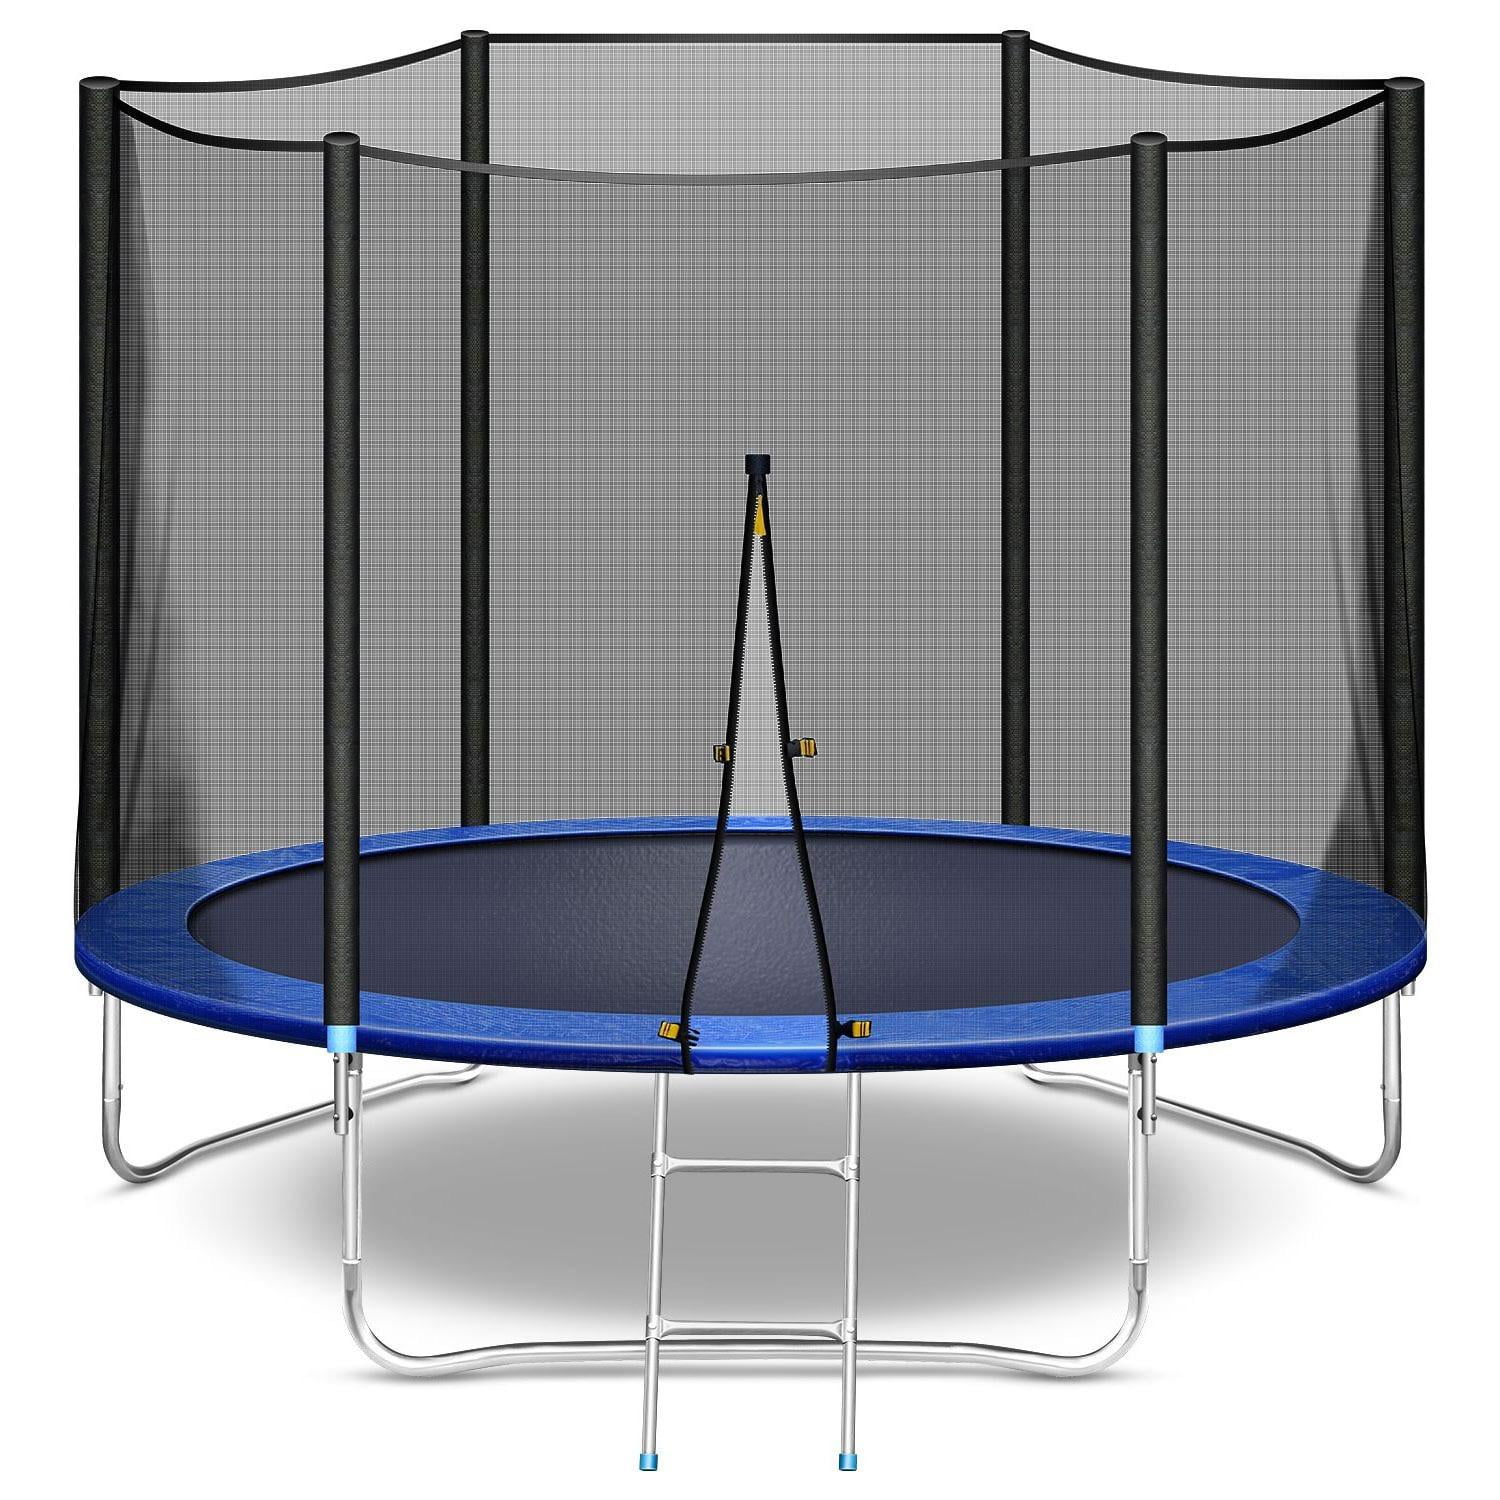 ULTRAPOWER SPORTS 8ft / 10ft / 12ft Trampoline Complete Set with Safety Enclosure Netting Jumping Sheet Rain Cover and Ladder Frame Cover Pad 